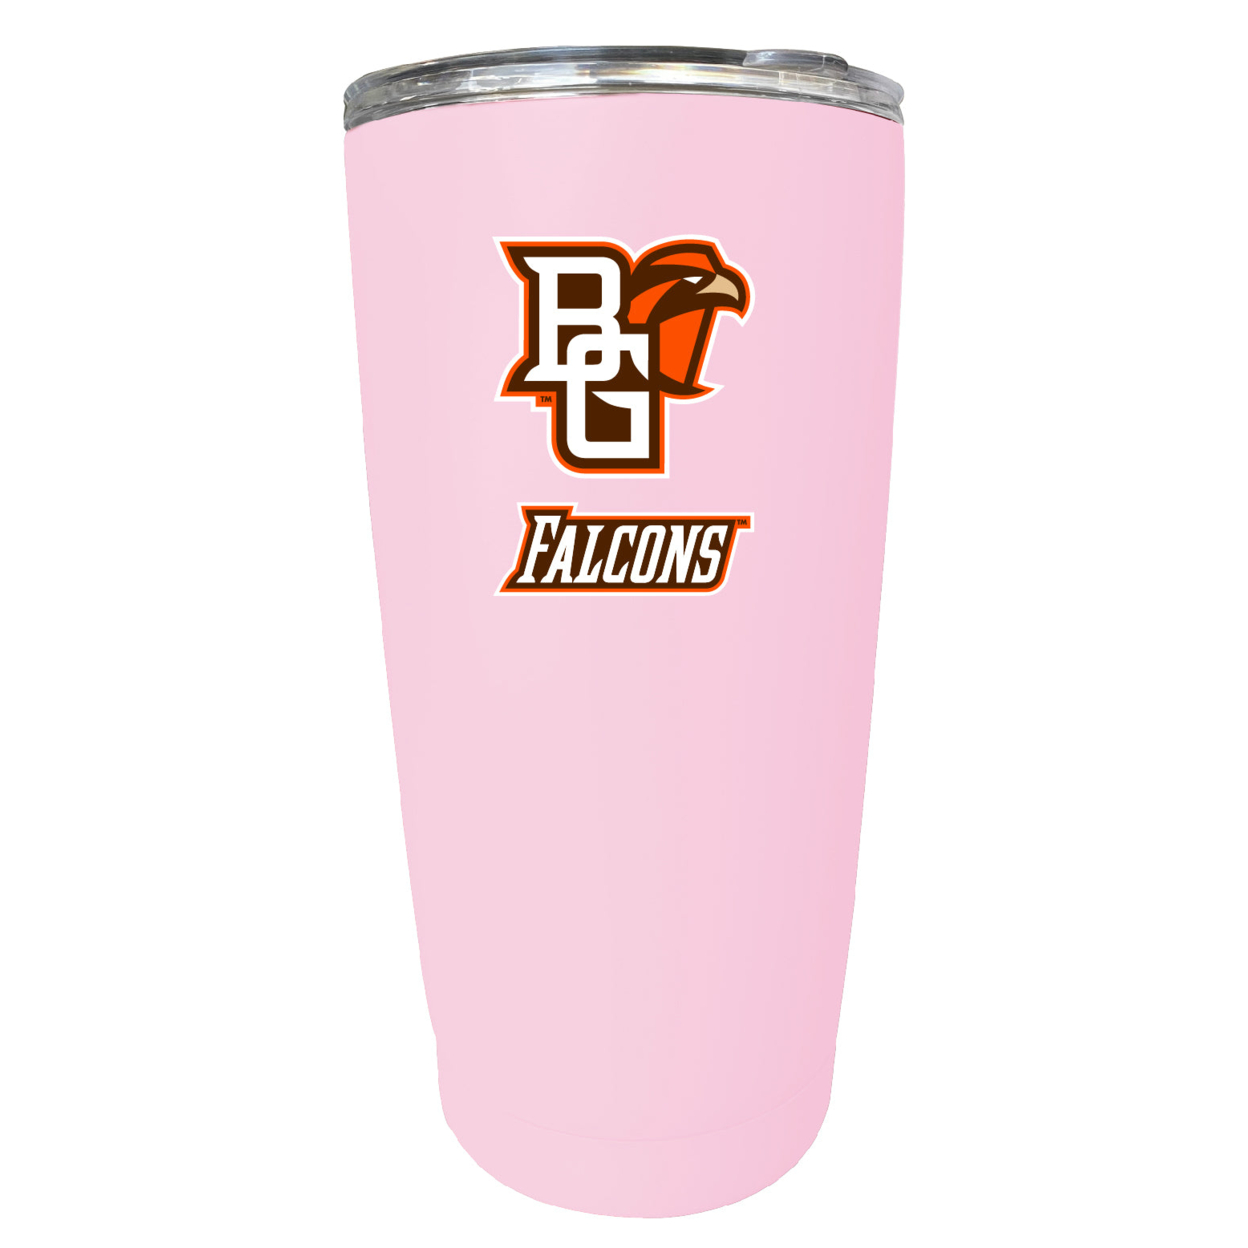 Bowling Green Falcons 16 Oz Stainless Steel Insulated Tumbler - Pink